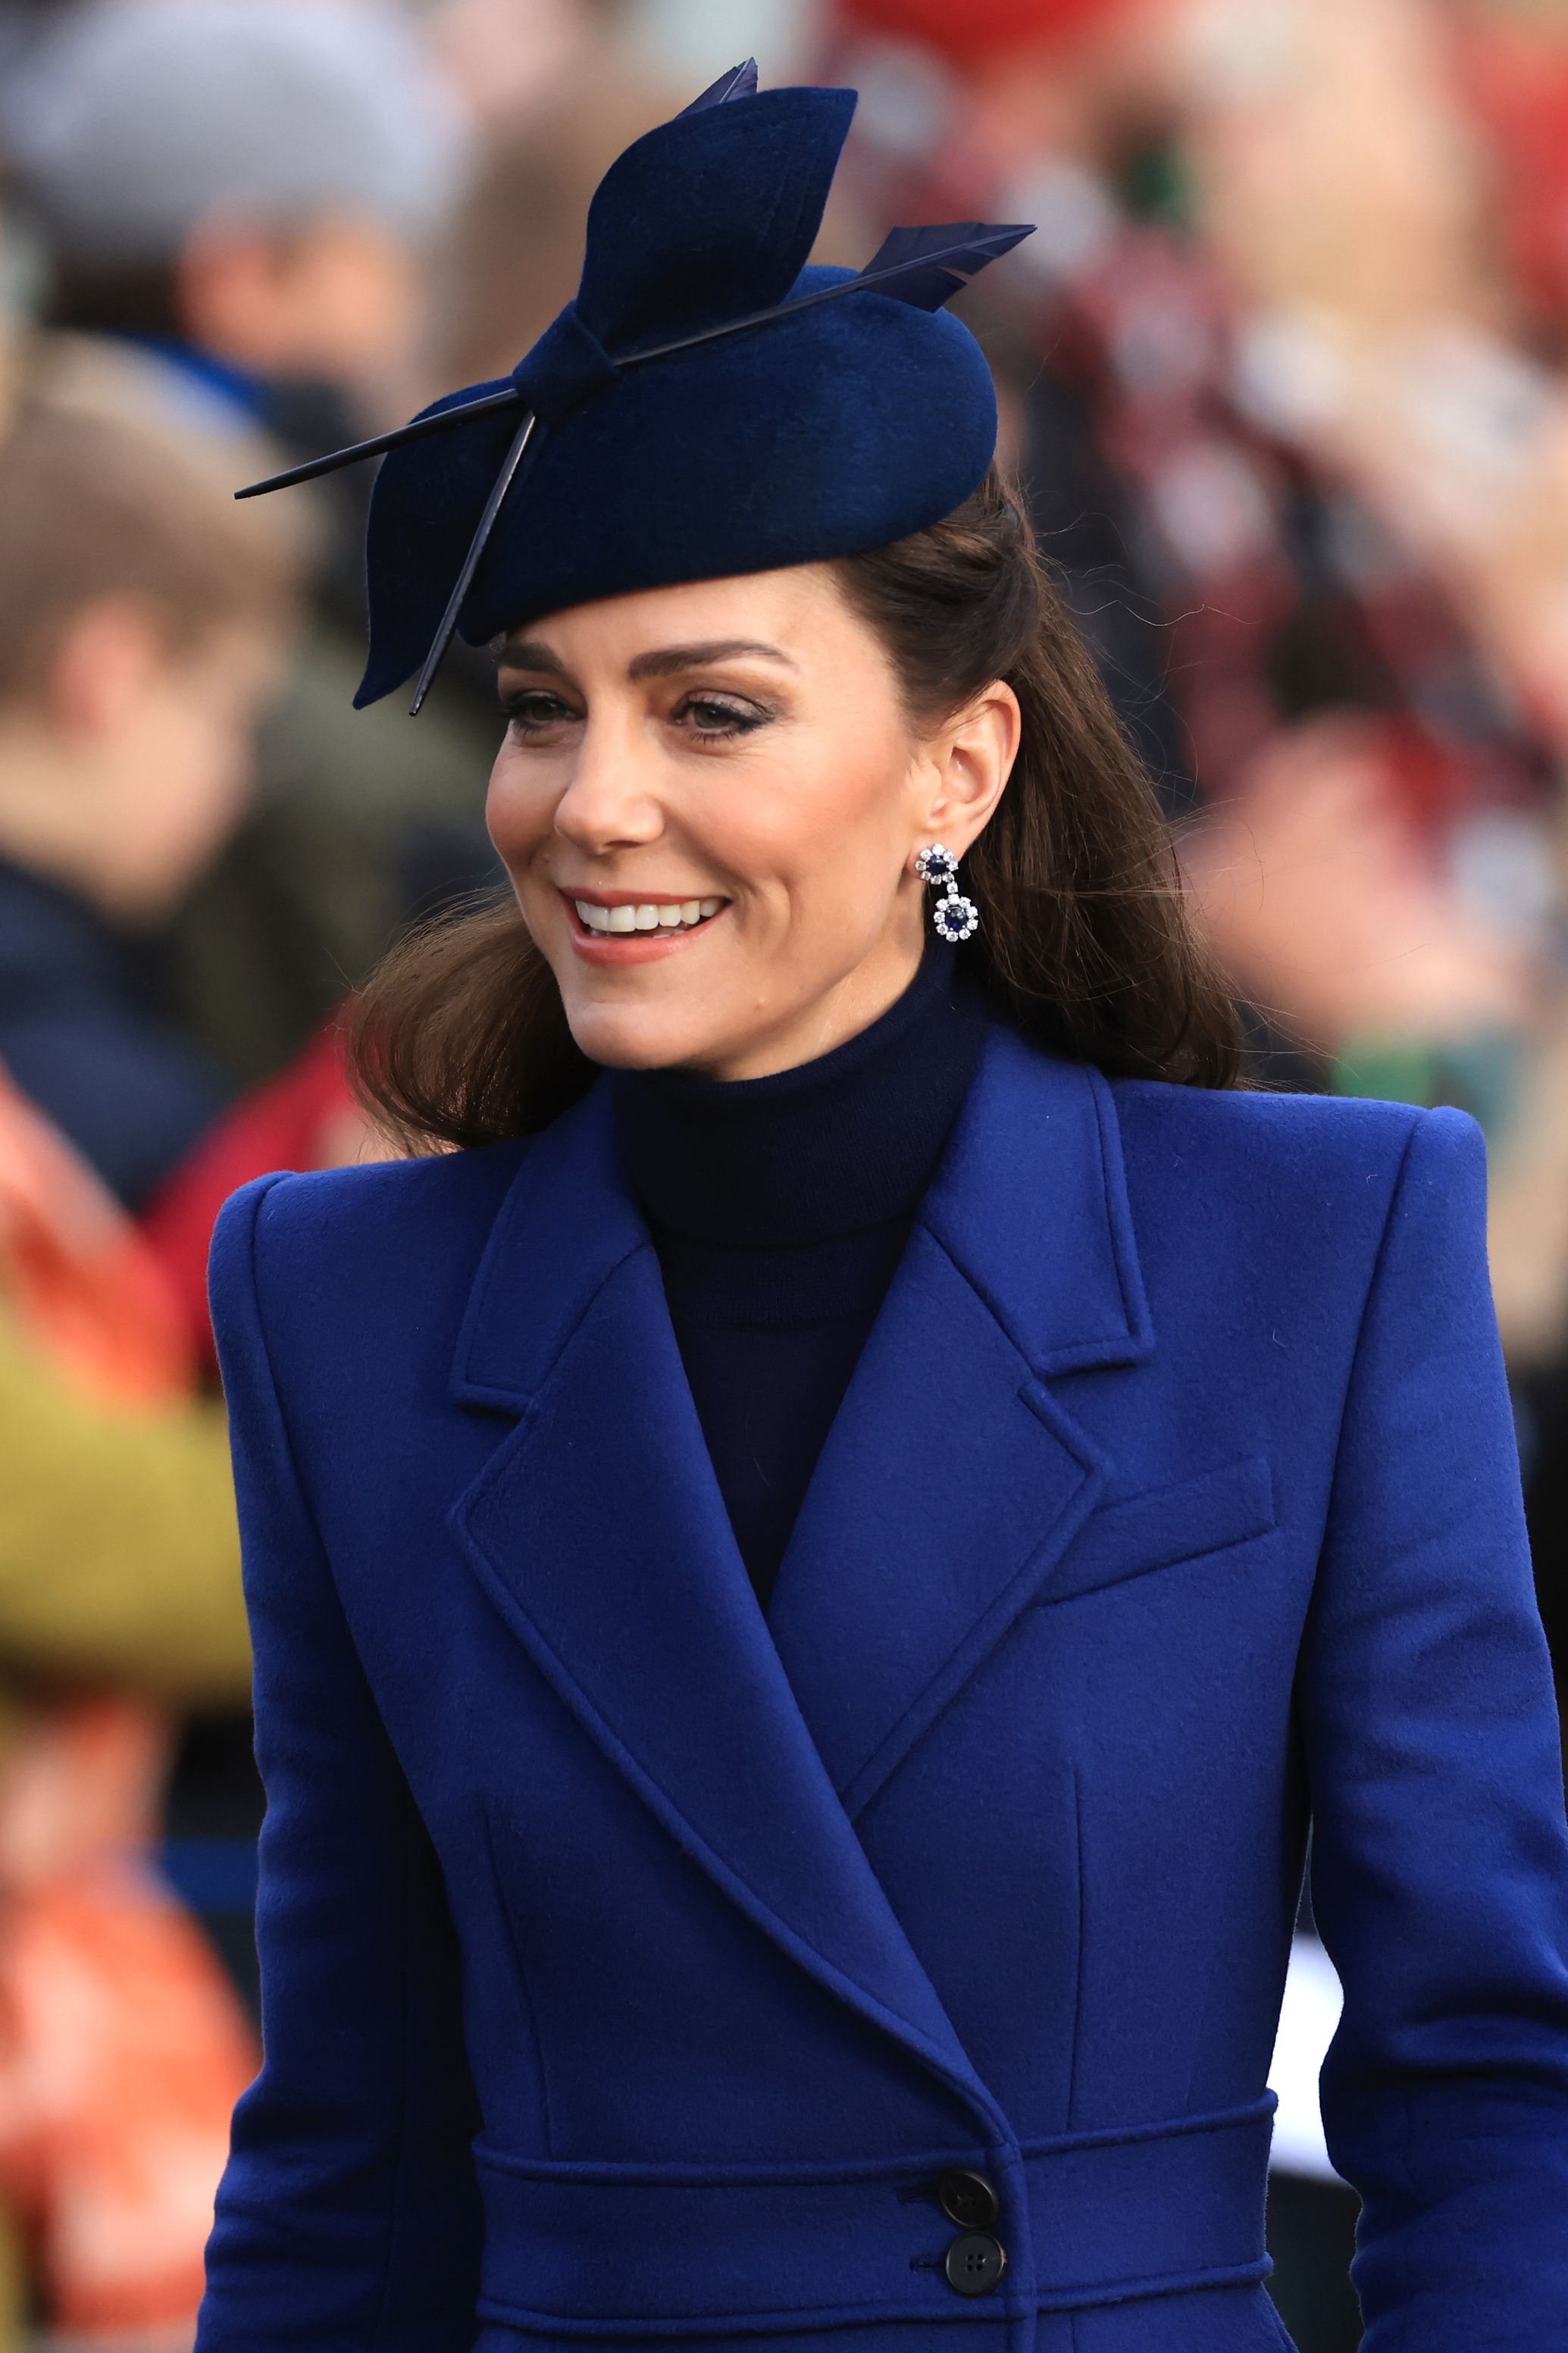 Kate Middleton smiling in a blue hat and coat at a public event